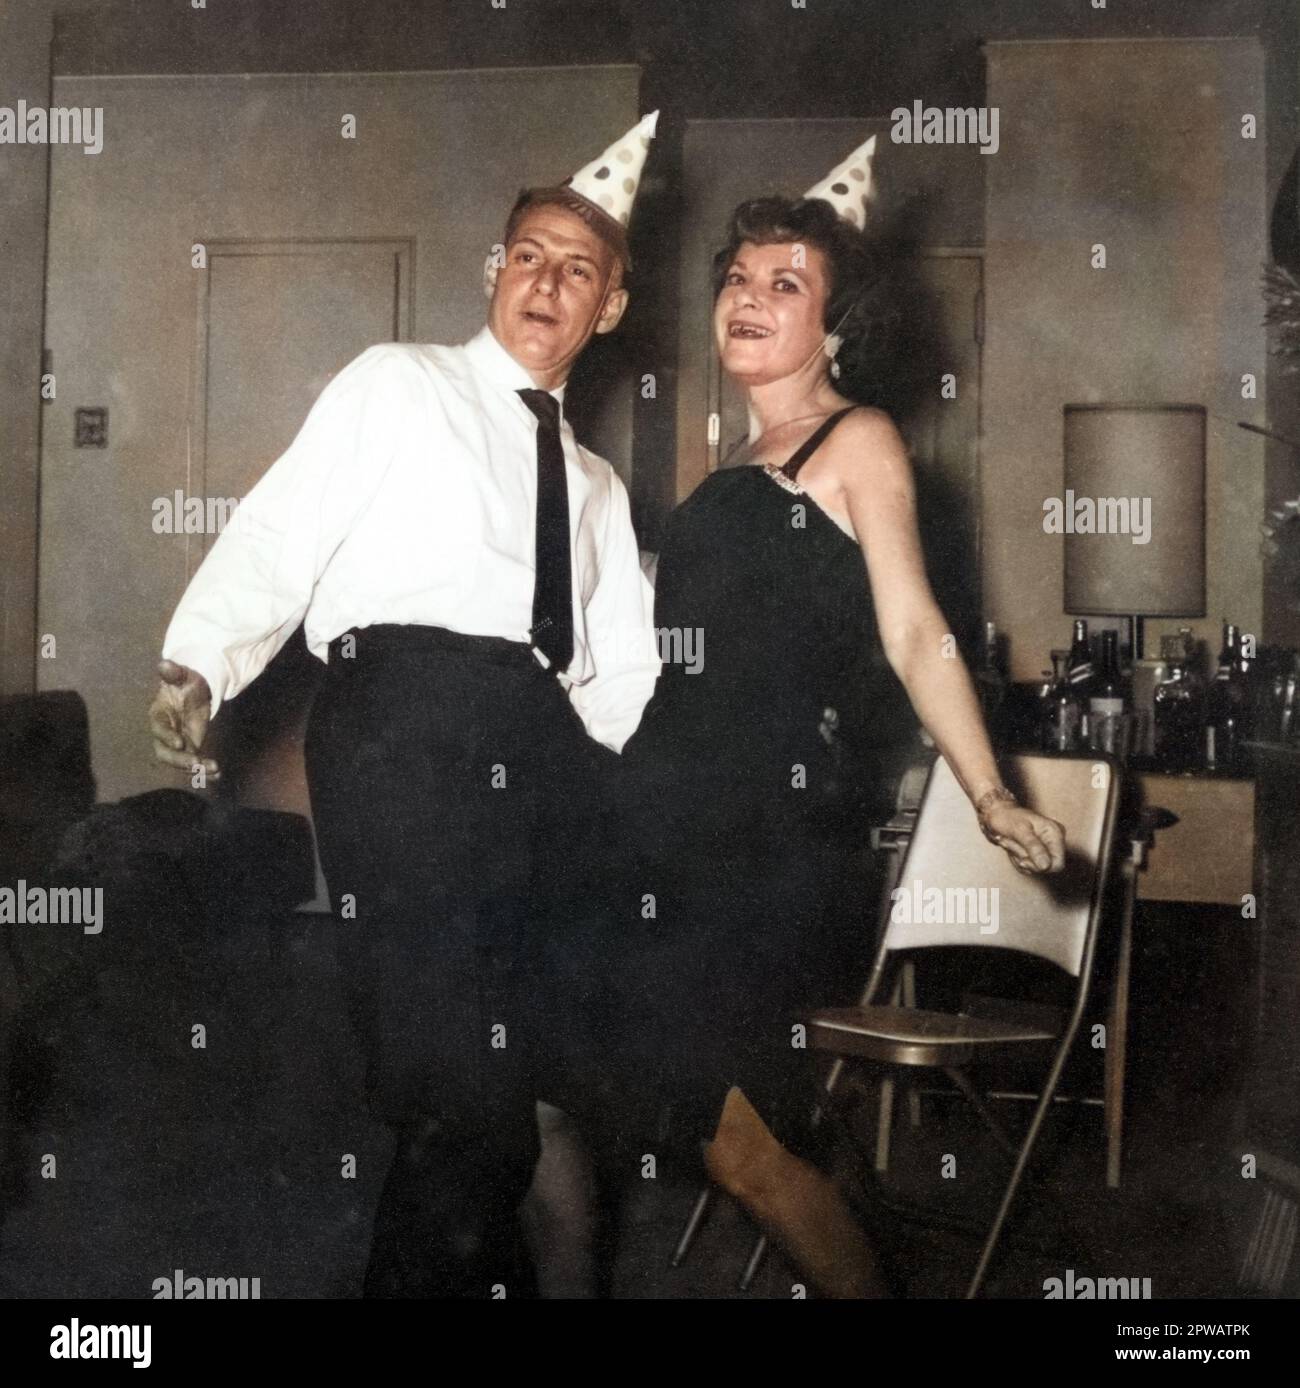 Archival photo of an adult couple dancing at home with party hats circa 1950s-1960s, likely New Year's Eve. Stock Photo